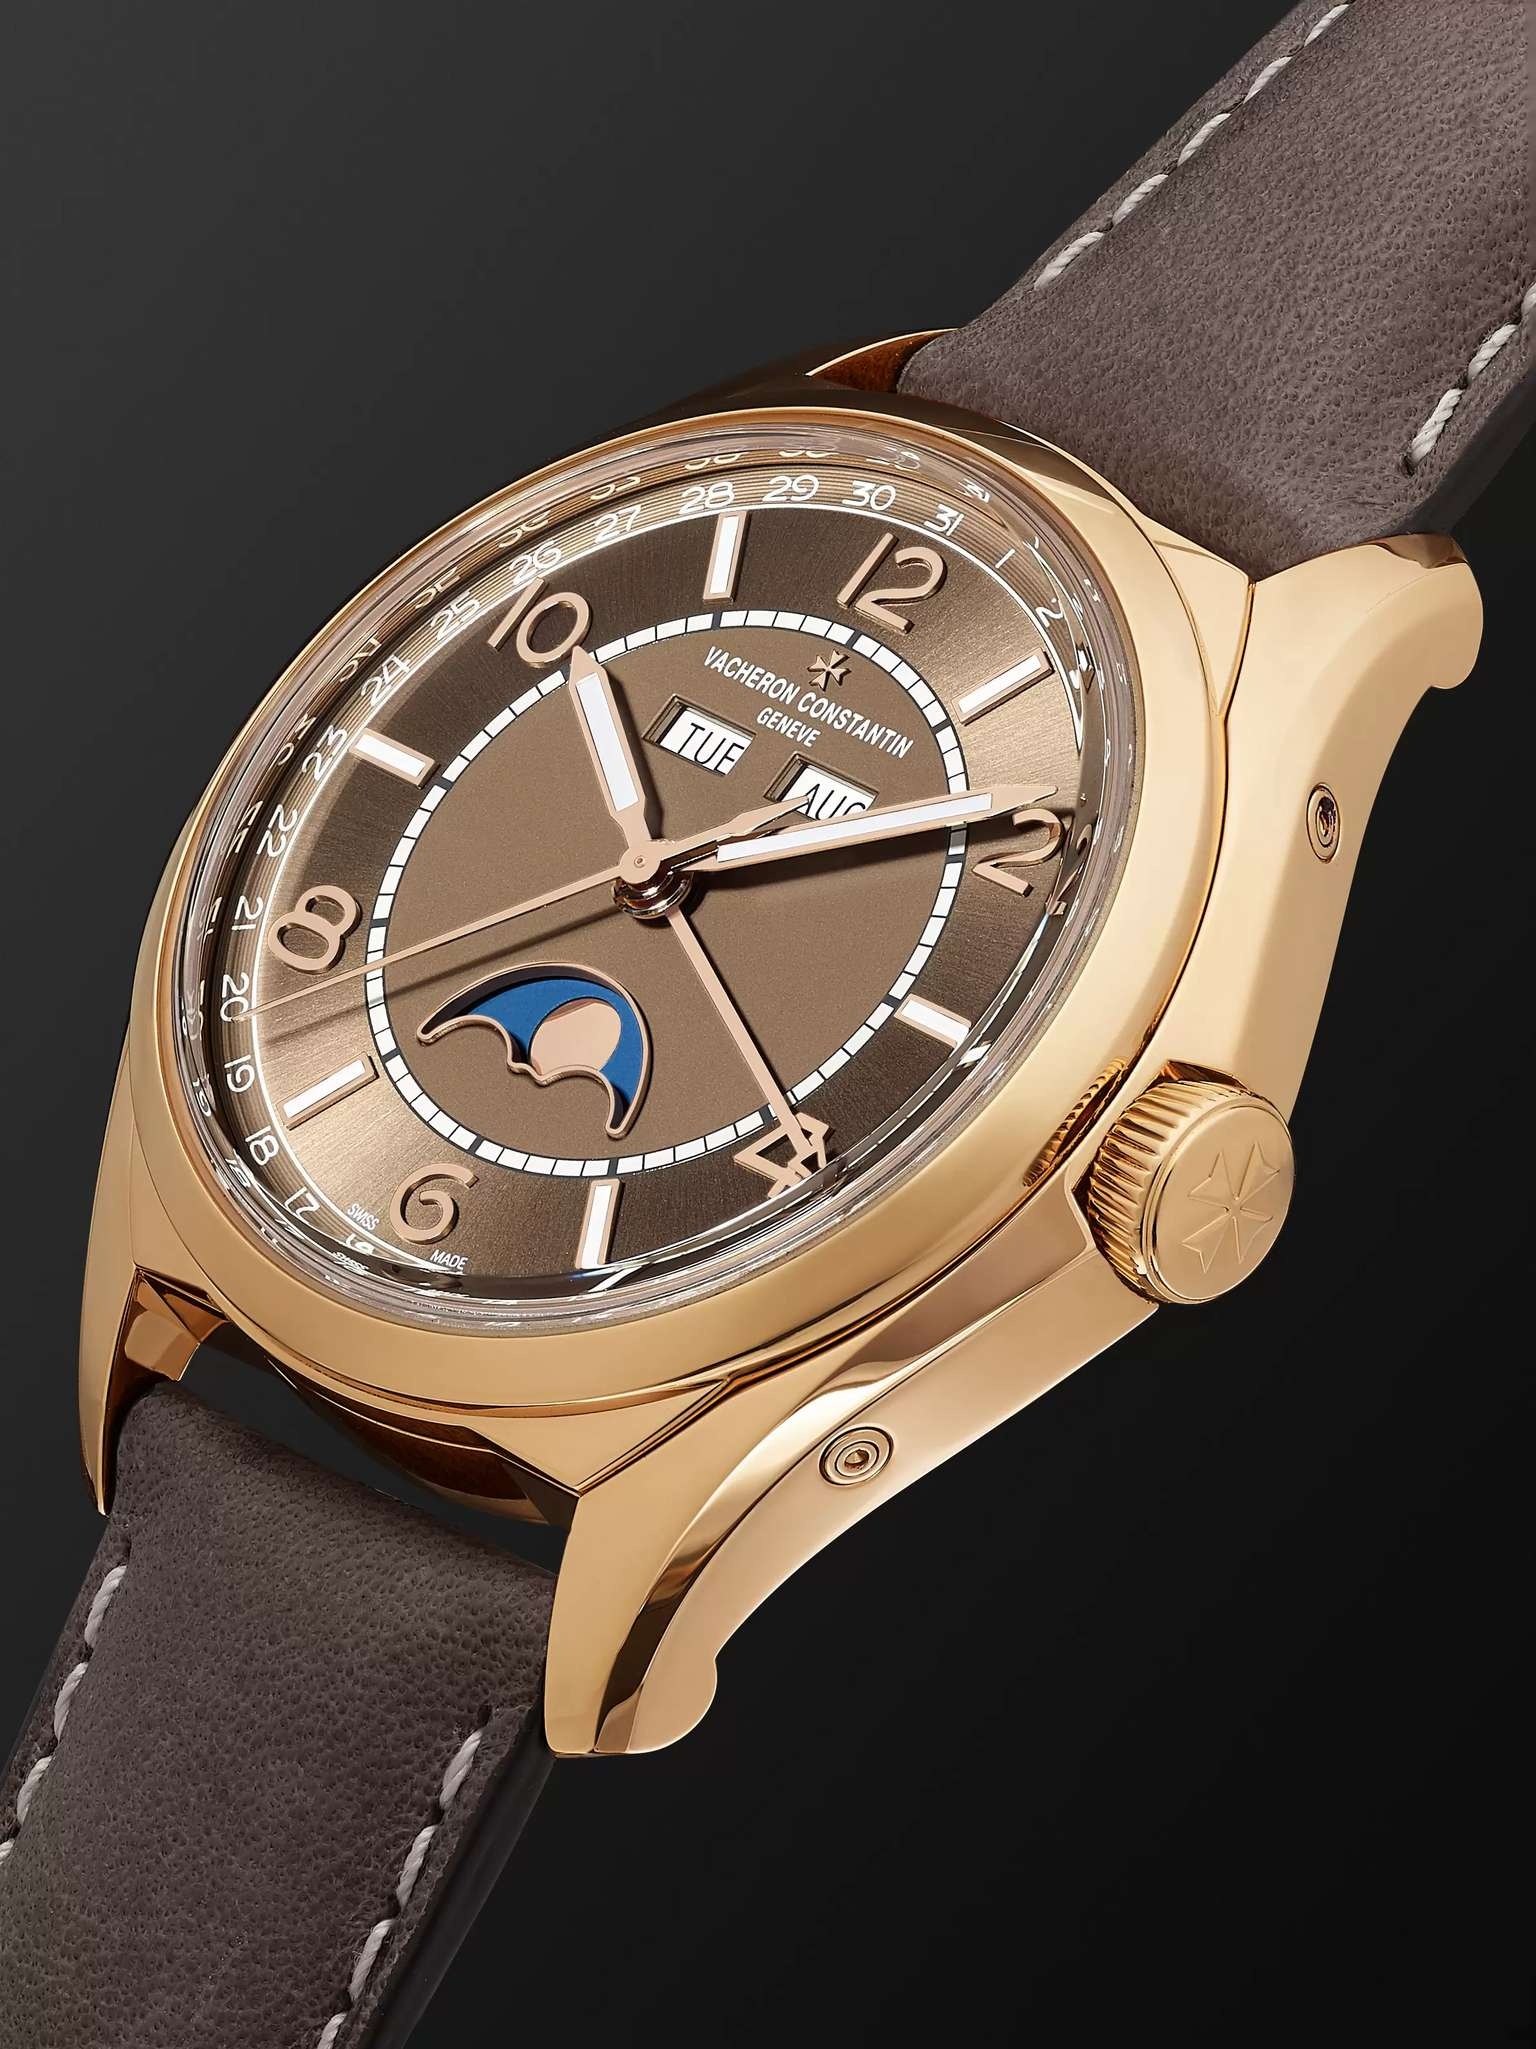 Fiftysix Complete Calendar Automatic 40mm 18-Karat Pink Gold and Leather Watch, Ref. No. 4000E/000R- - 4